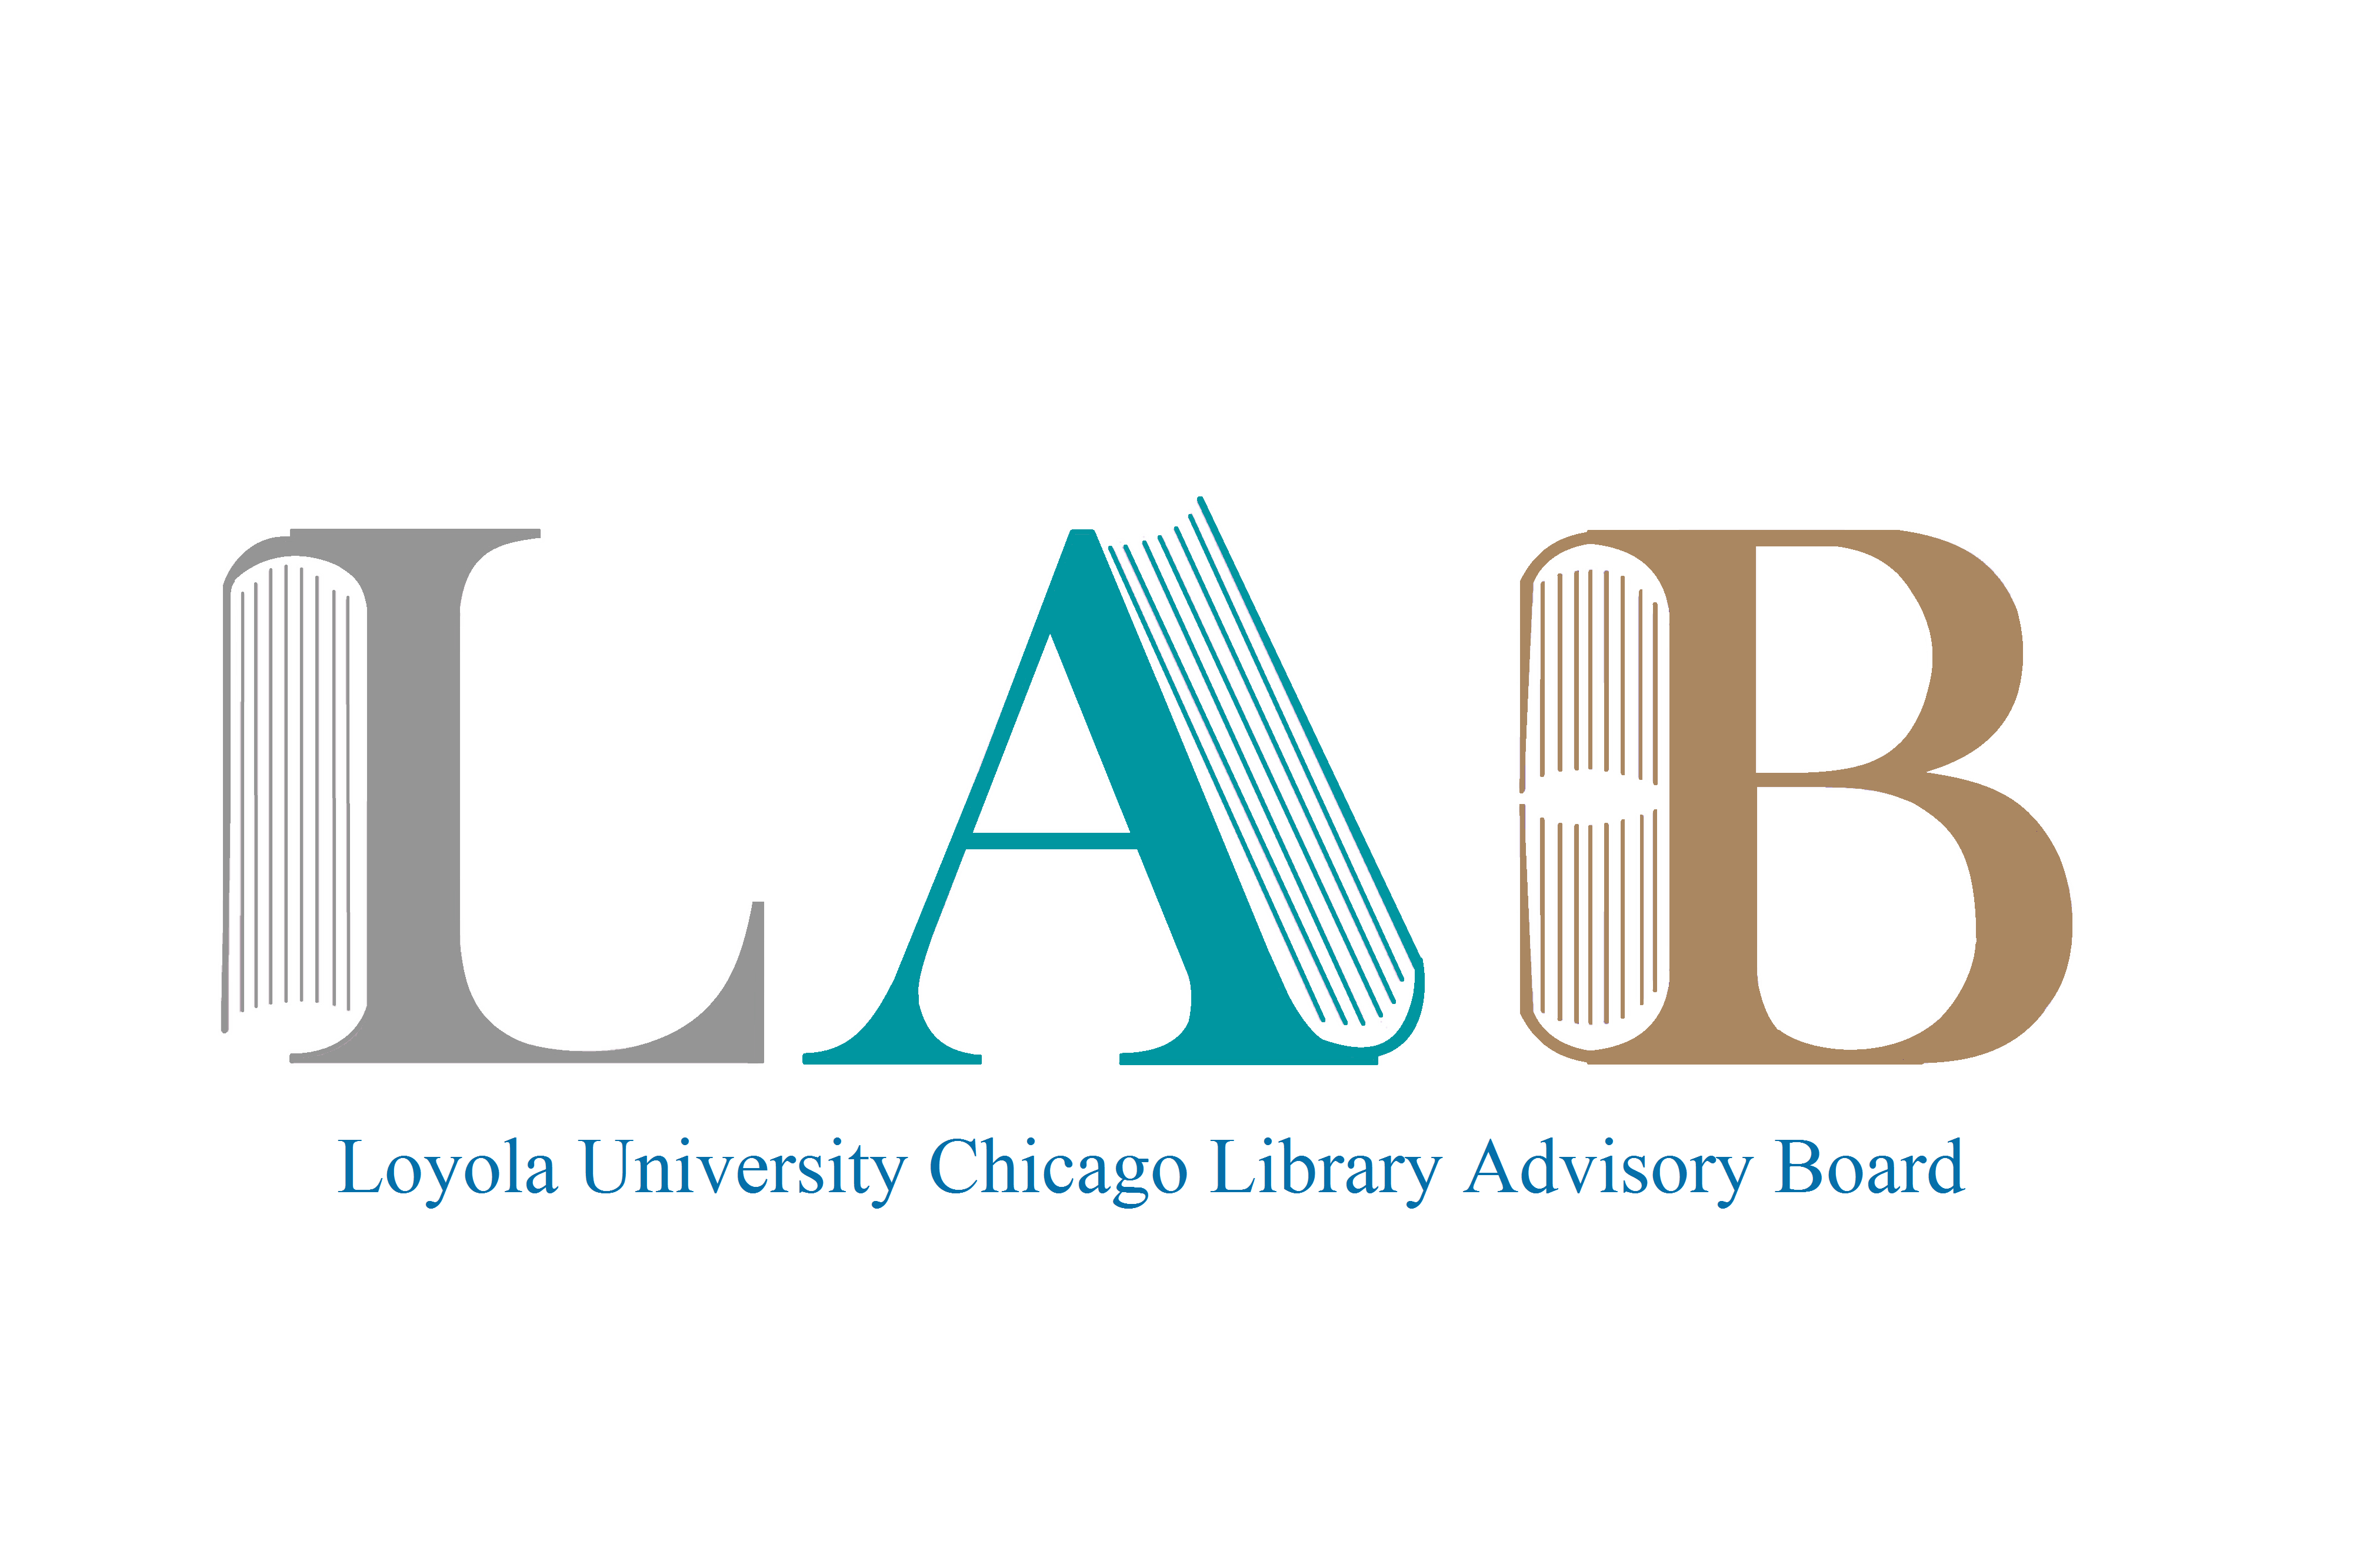 Join the Library Advisory Board!